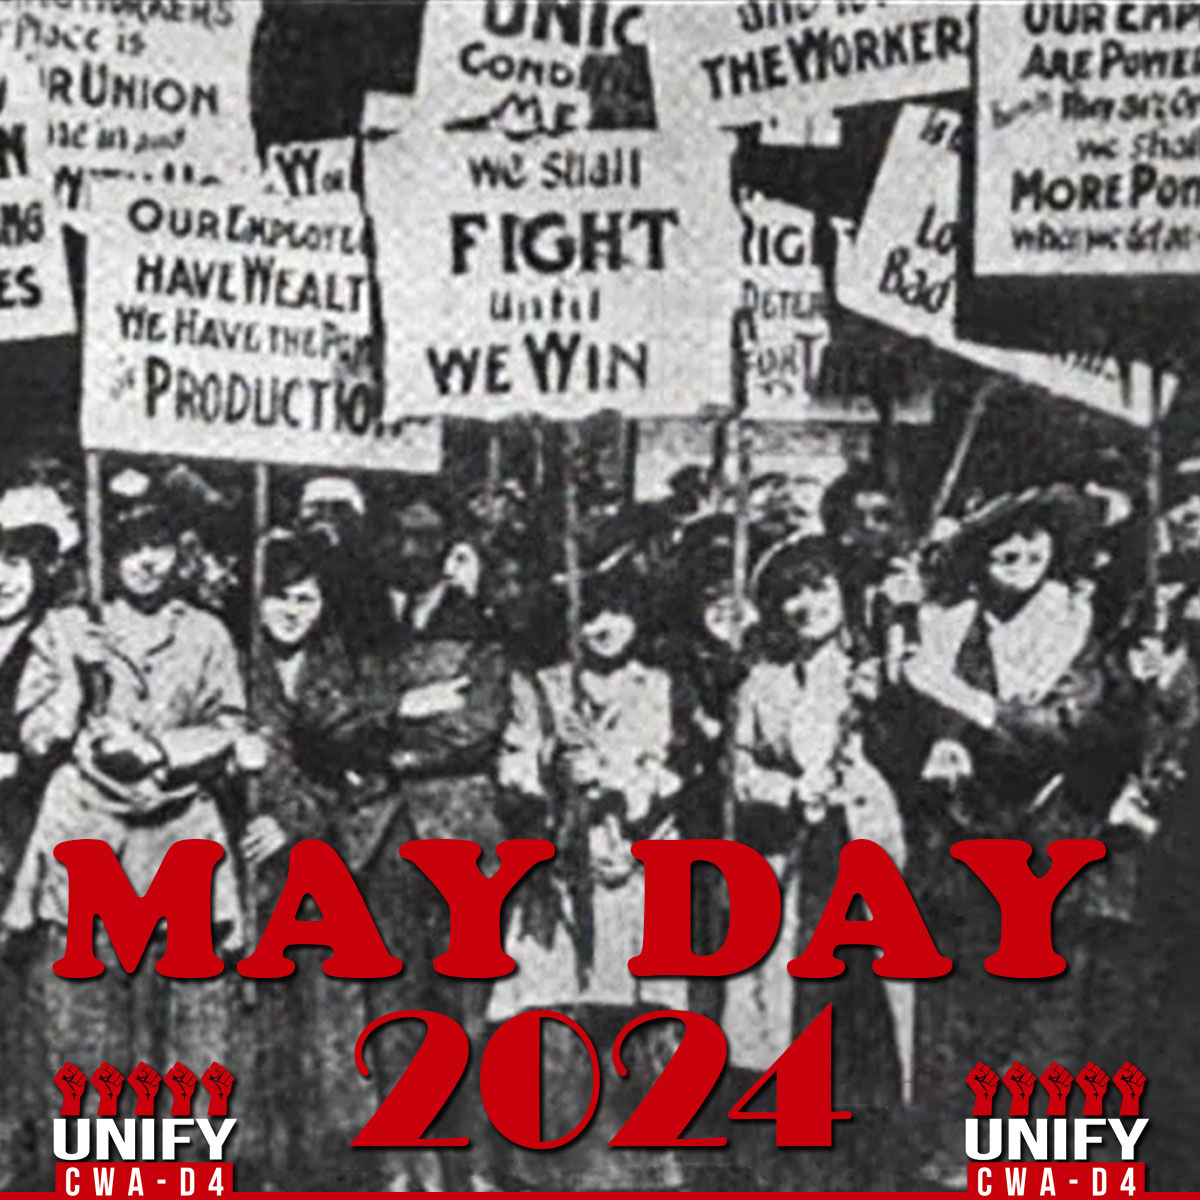 Today we celebrate #MayDay2024 by standing united for workers' rights and solidarity across the world. Let’s keep fighting for fair wages and safe working conditions for all. #CWAStrong